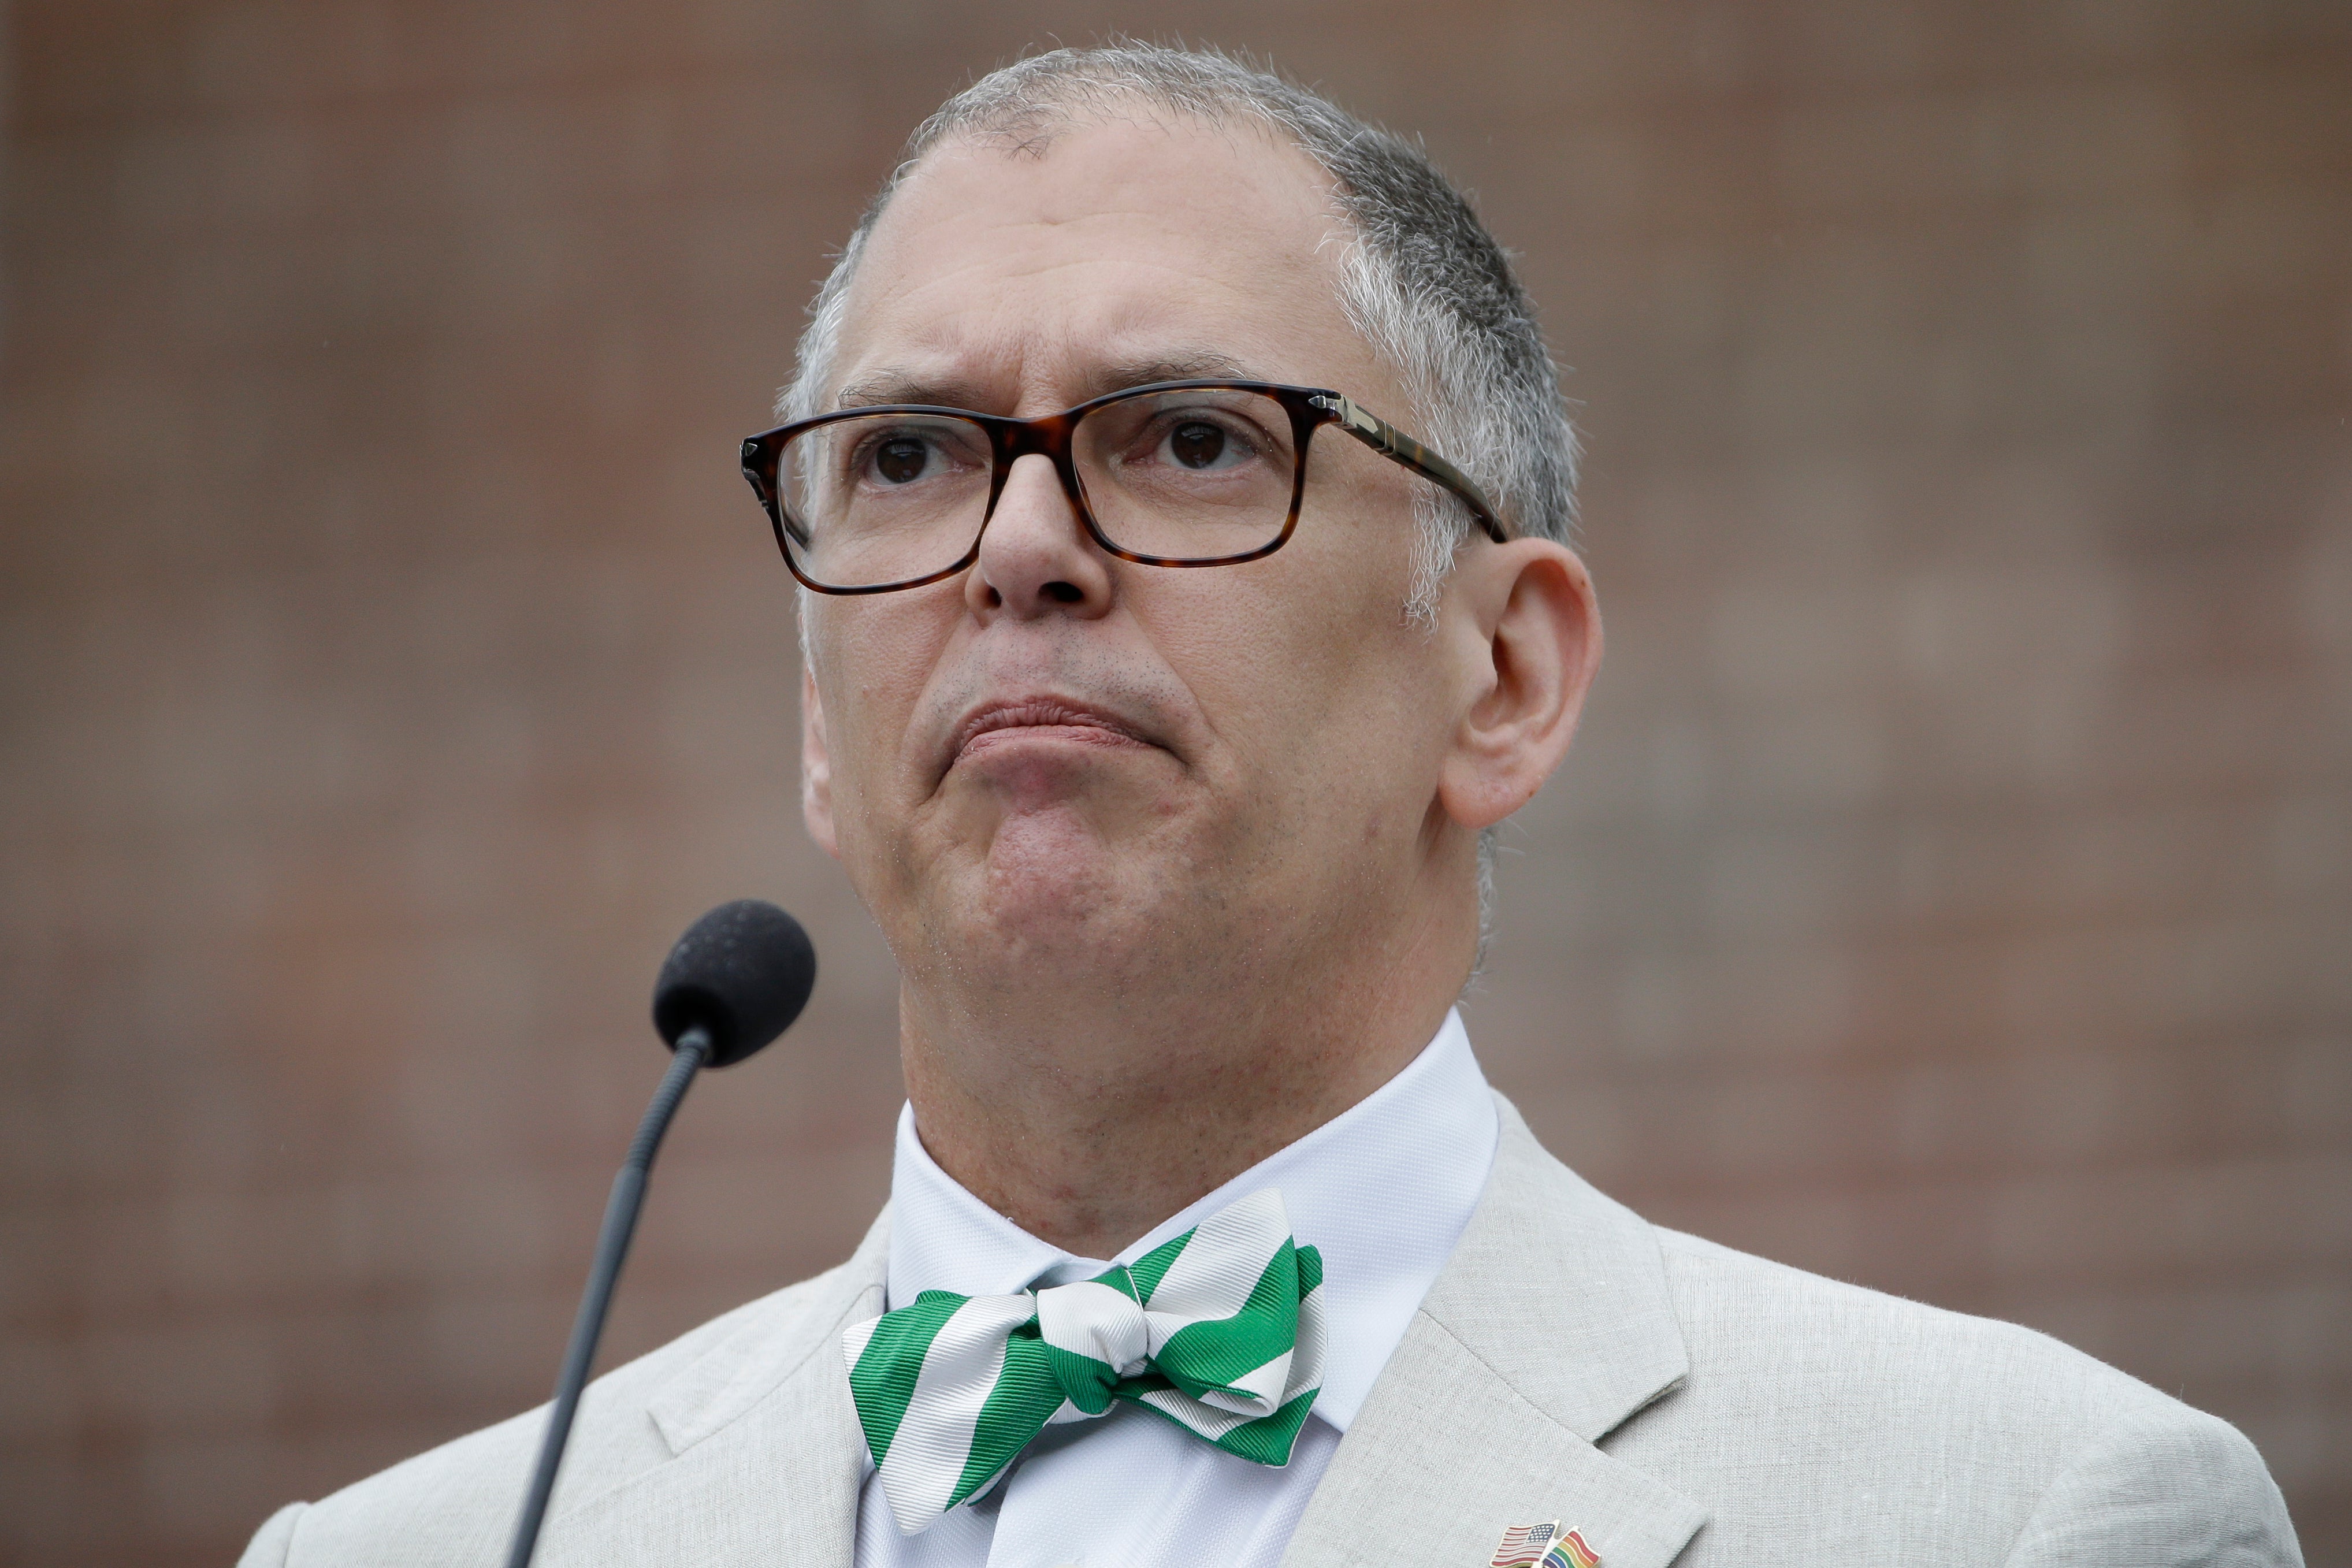 Jim Obergefell speaks during the National LGBT 50th Anniversary Ceremony, July 4, 2015, in front of Independence Hall in Philadelphia.